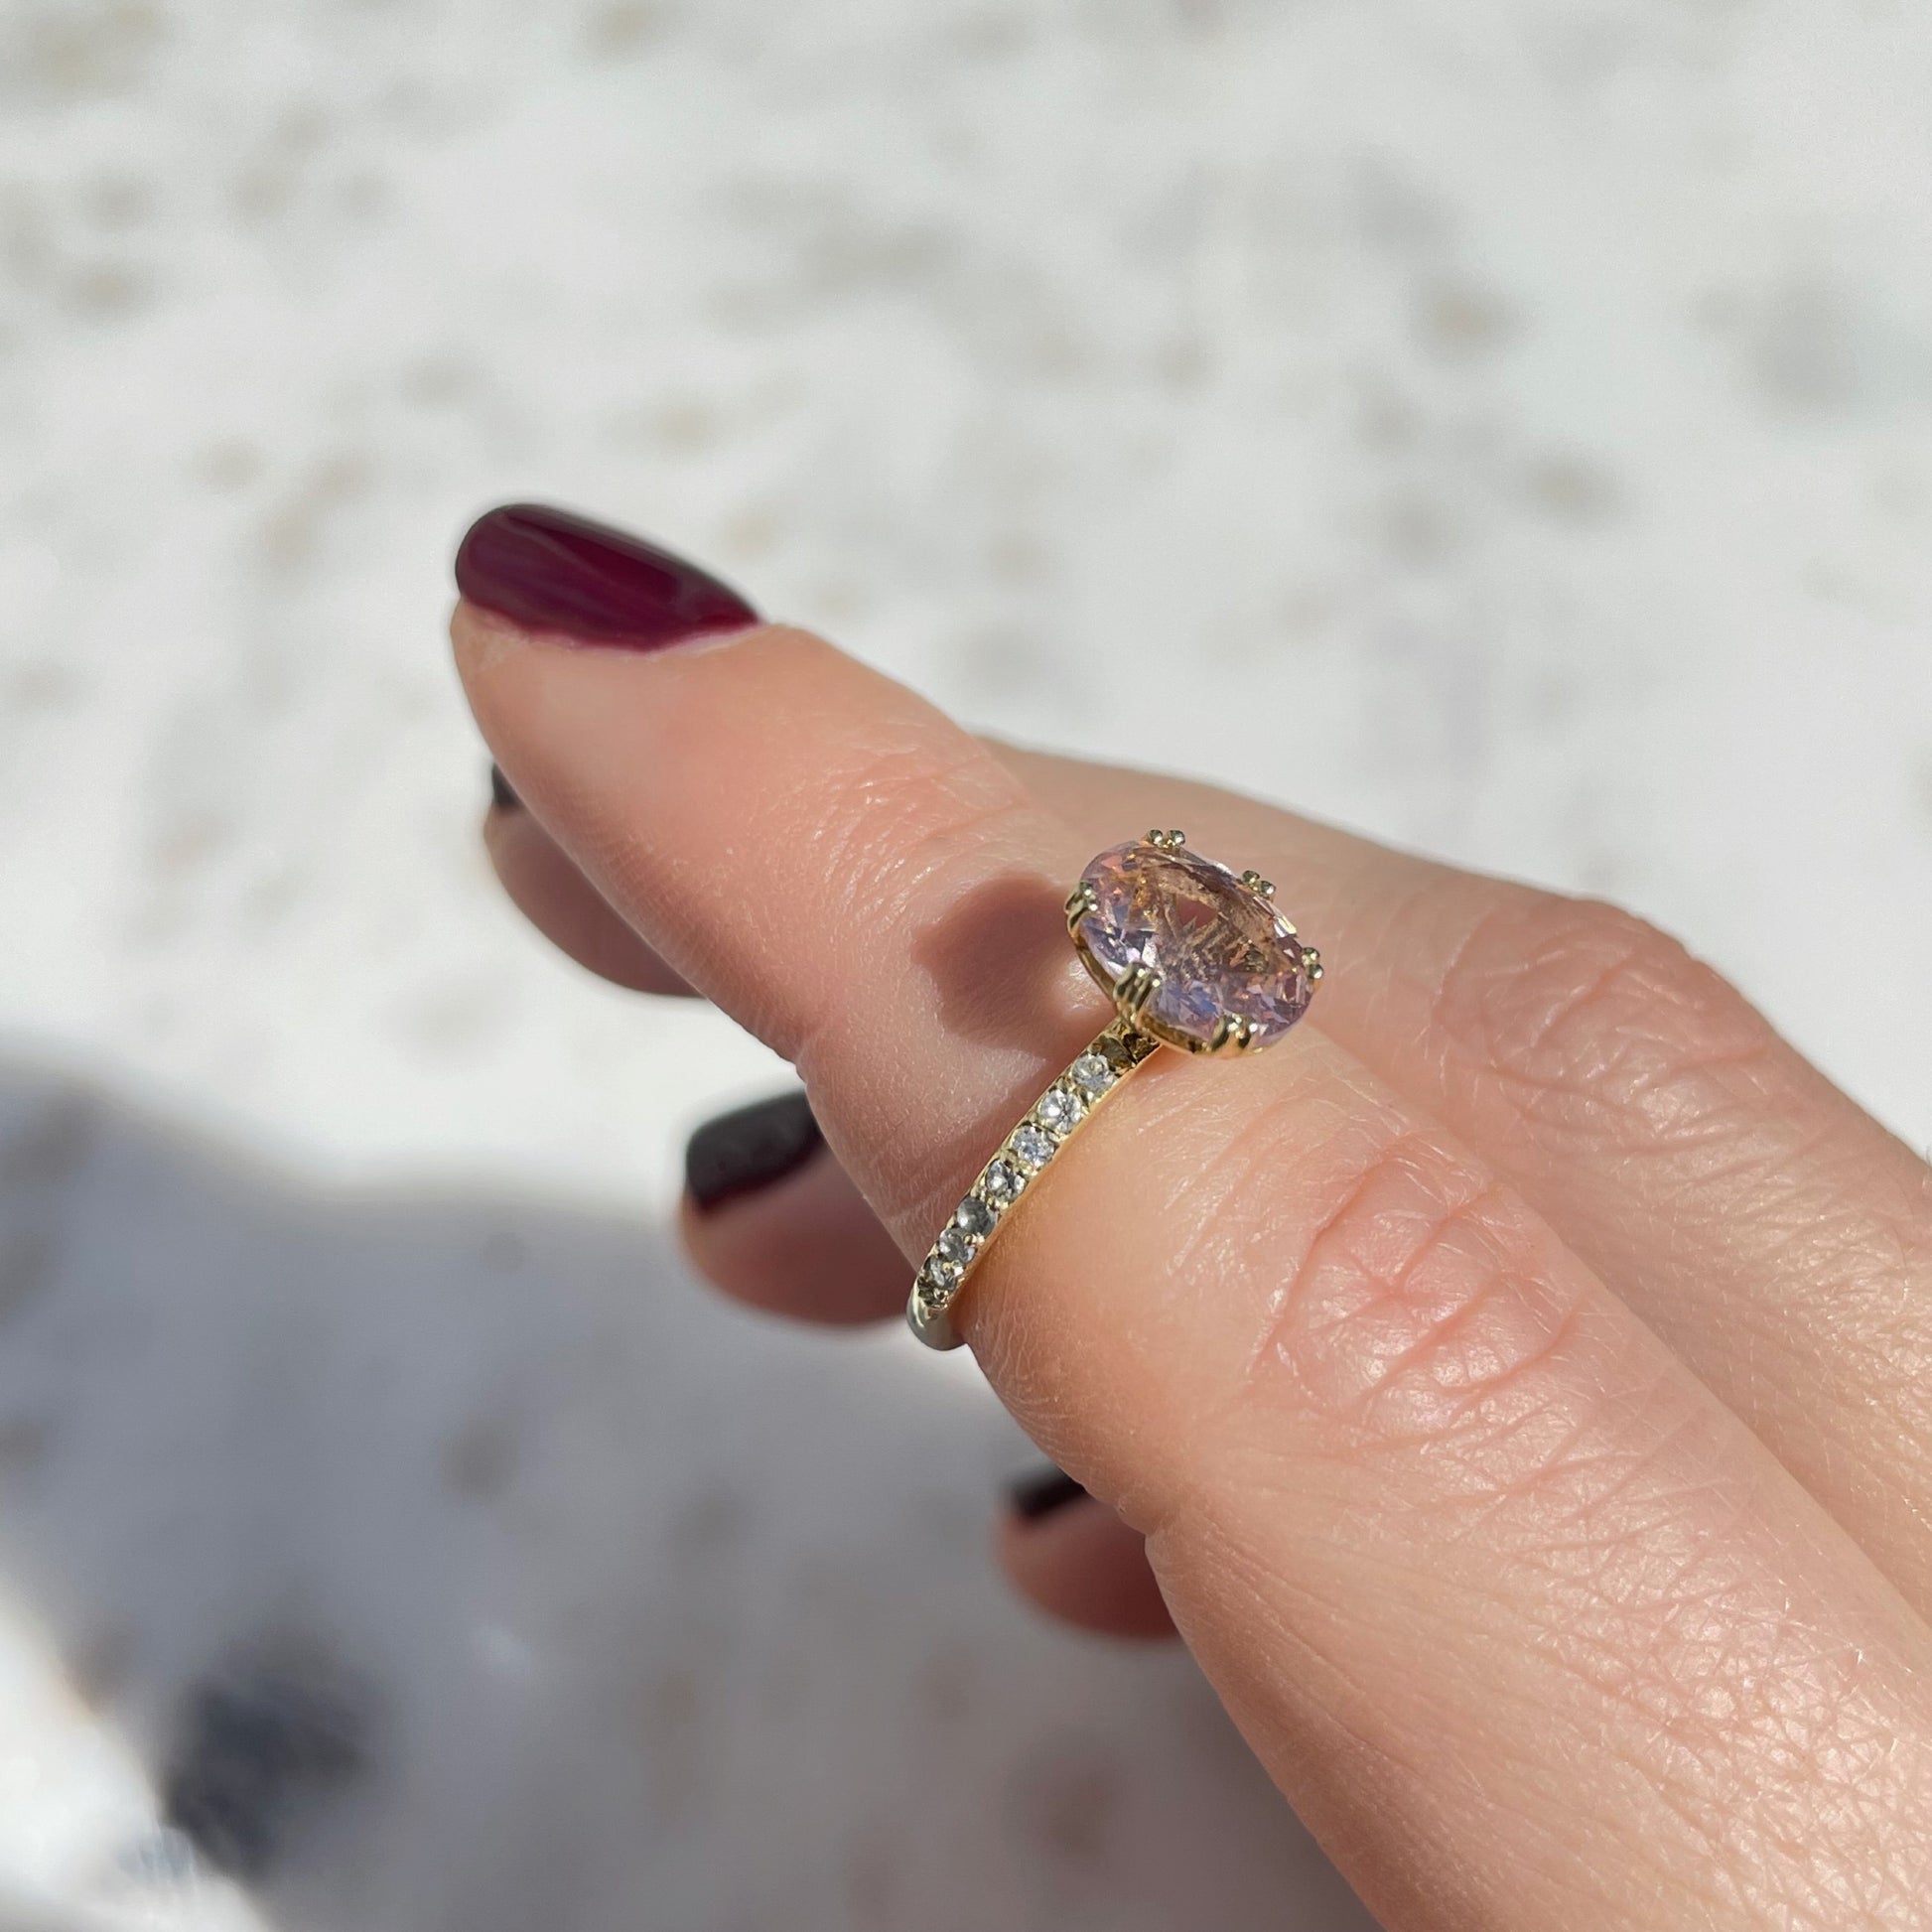 9kt gold and morganite Adeline Ring from Brenna Lou. Sold online in South Africa by Collective & Co.